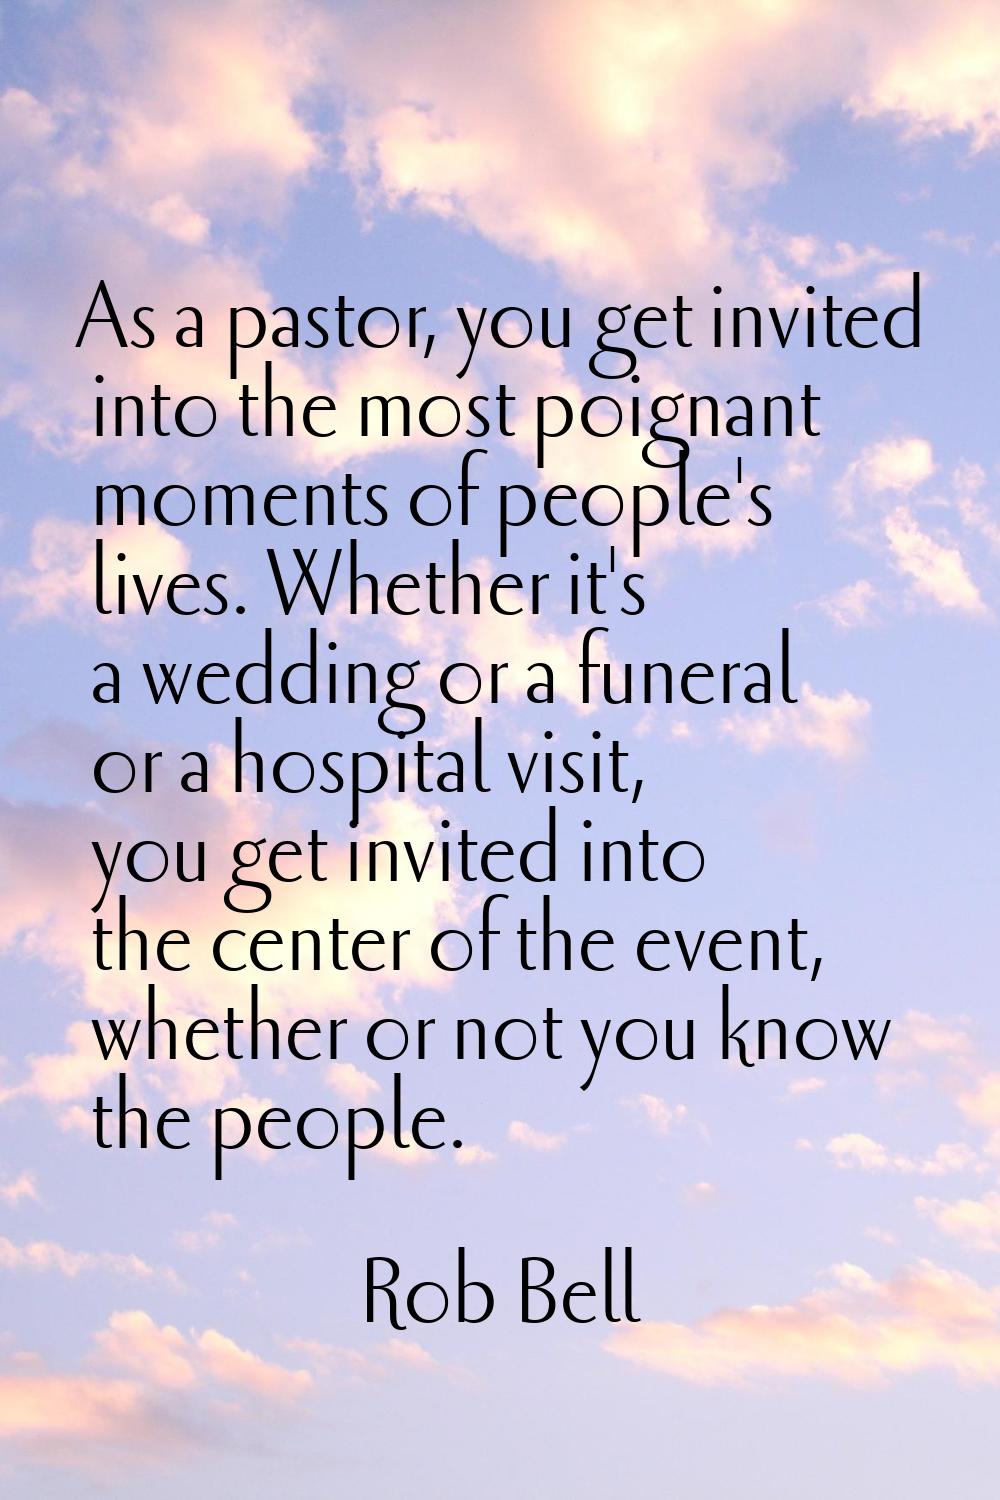 As a pastor, you get invited into the most poignant moments of people's lives. Whether it's a weddi